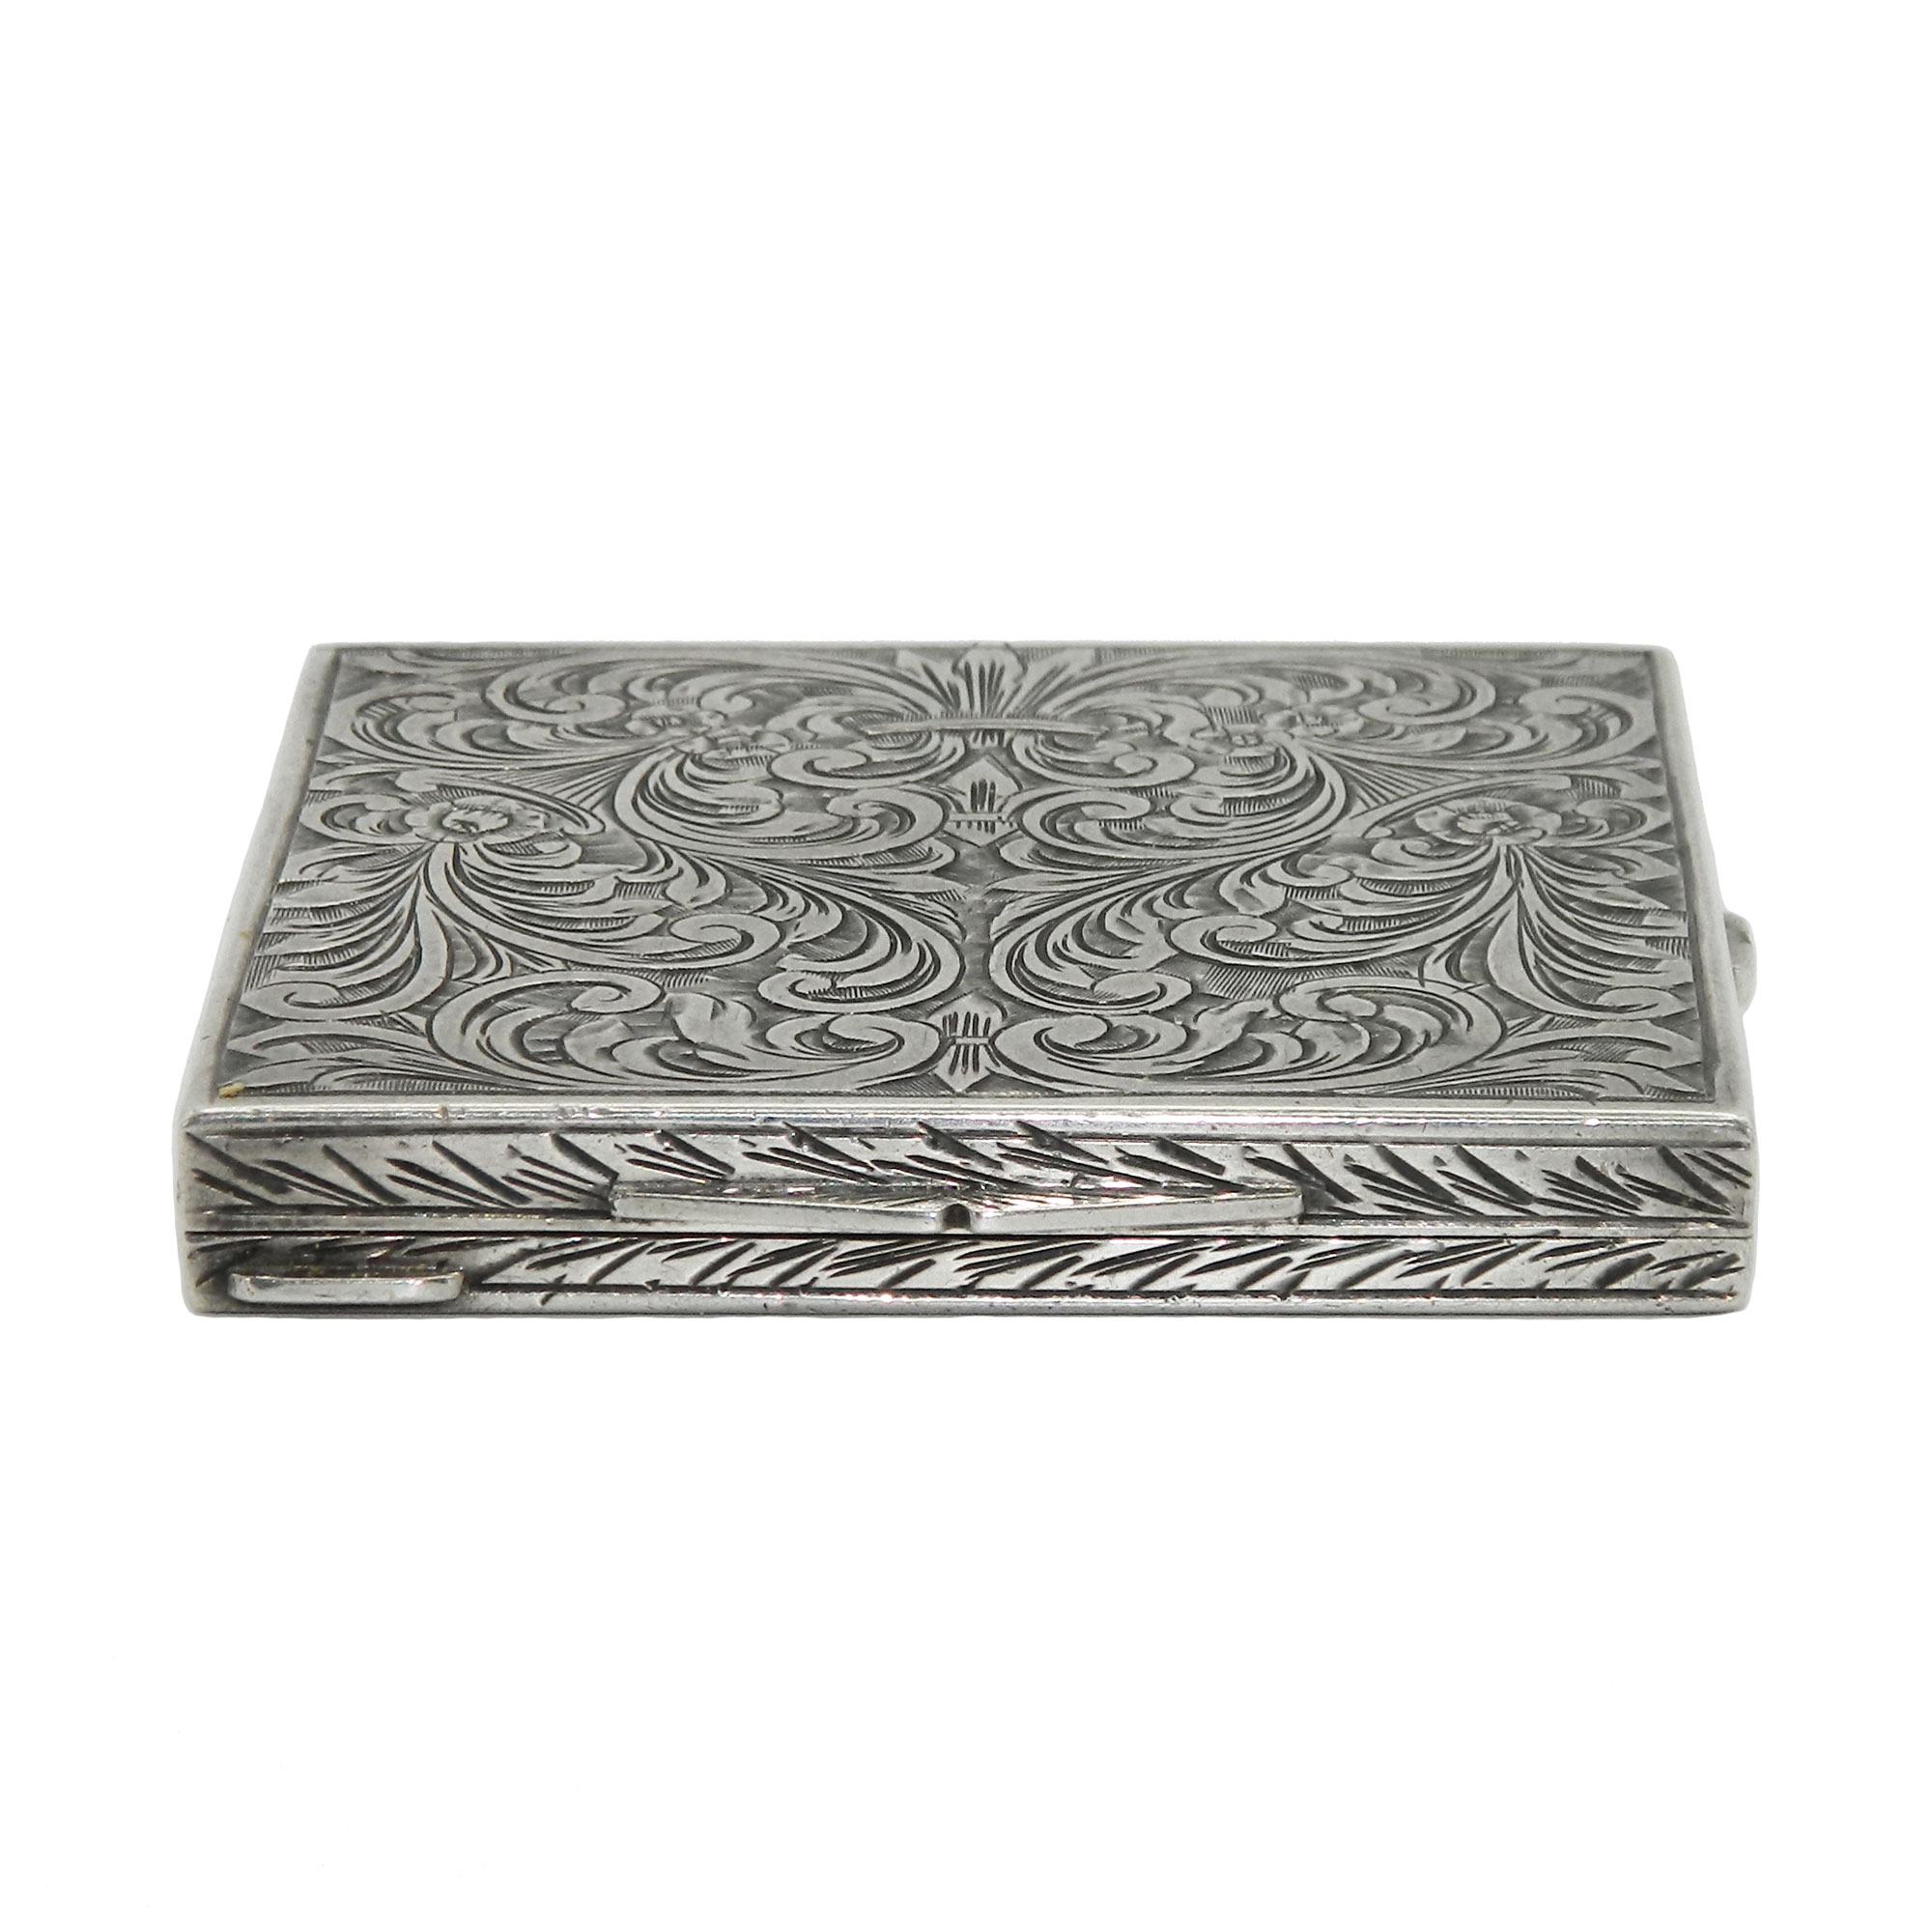 Italian sterling silver compact